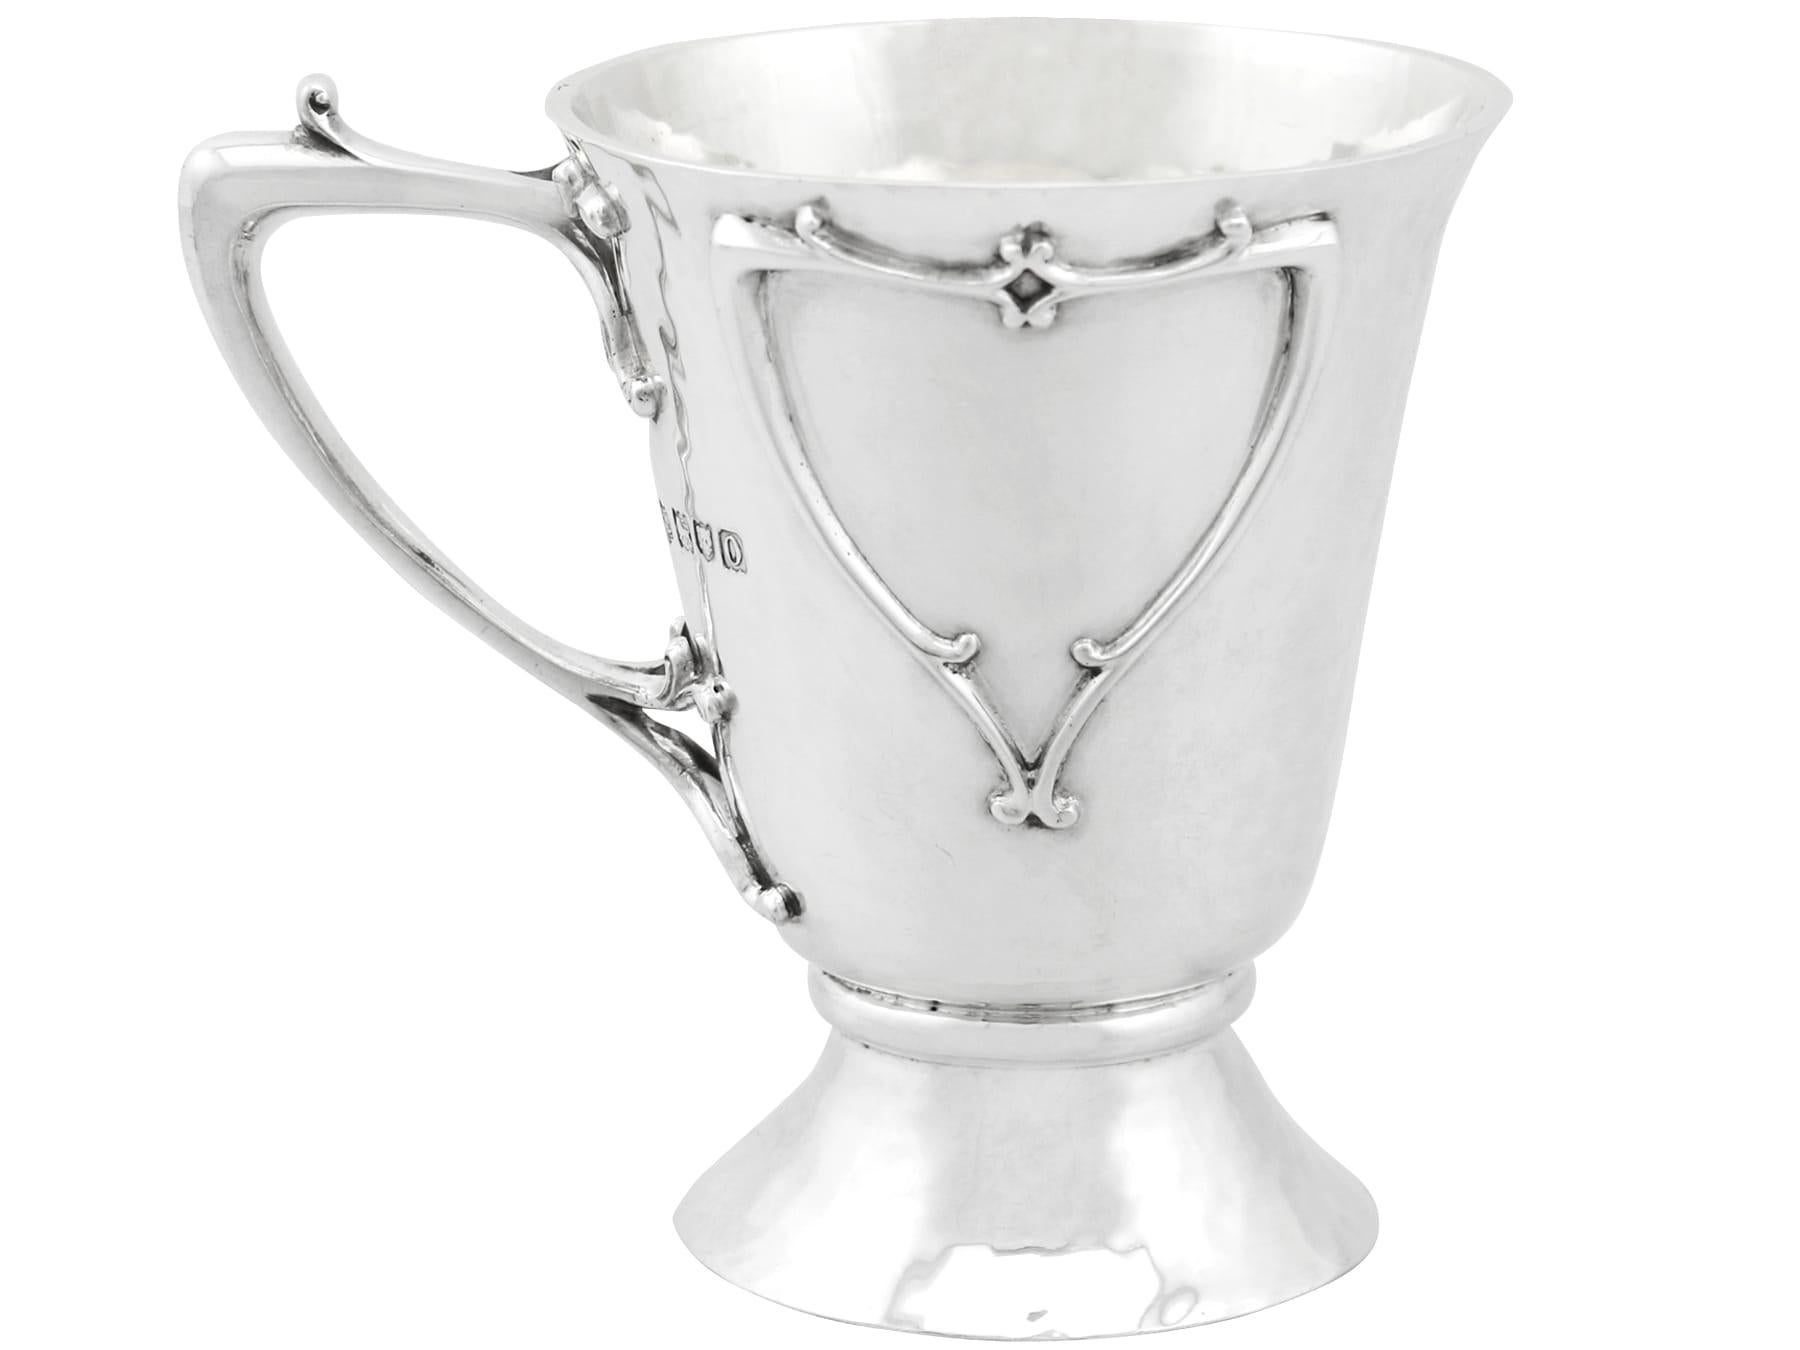 An exceptional, fine and impressive antique Edwardian English sterling silver christening mug made in the Art Nouveau style, boxed; an addition to our religious silverware collection.

This exceptional antique Edwardian sterling silver christening